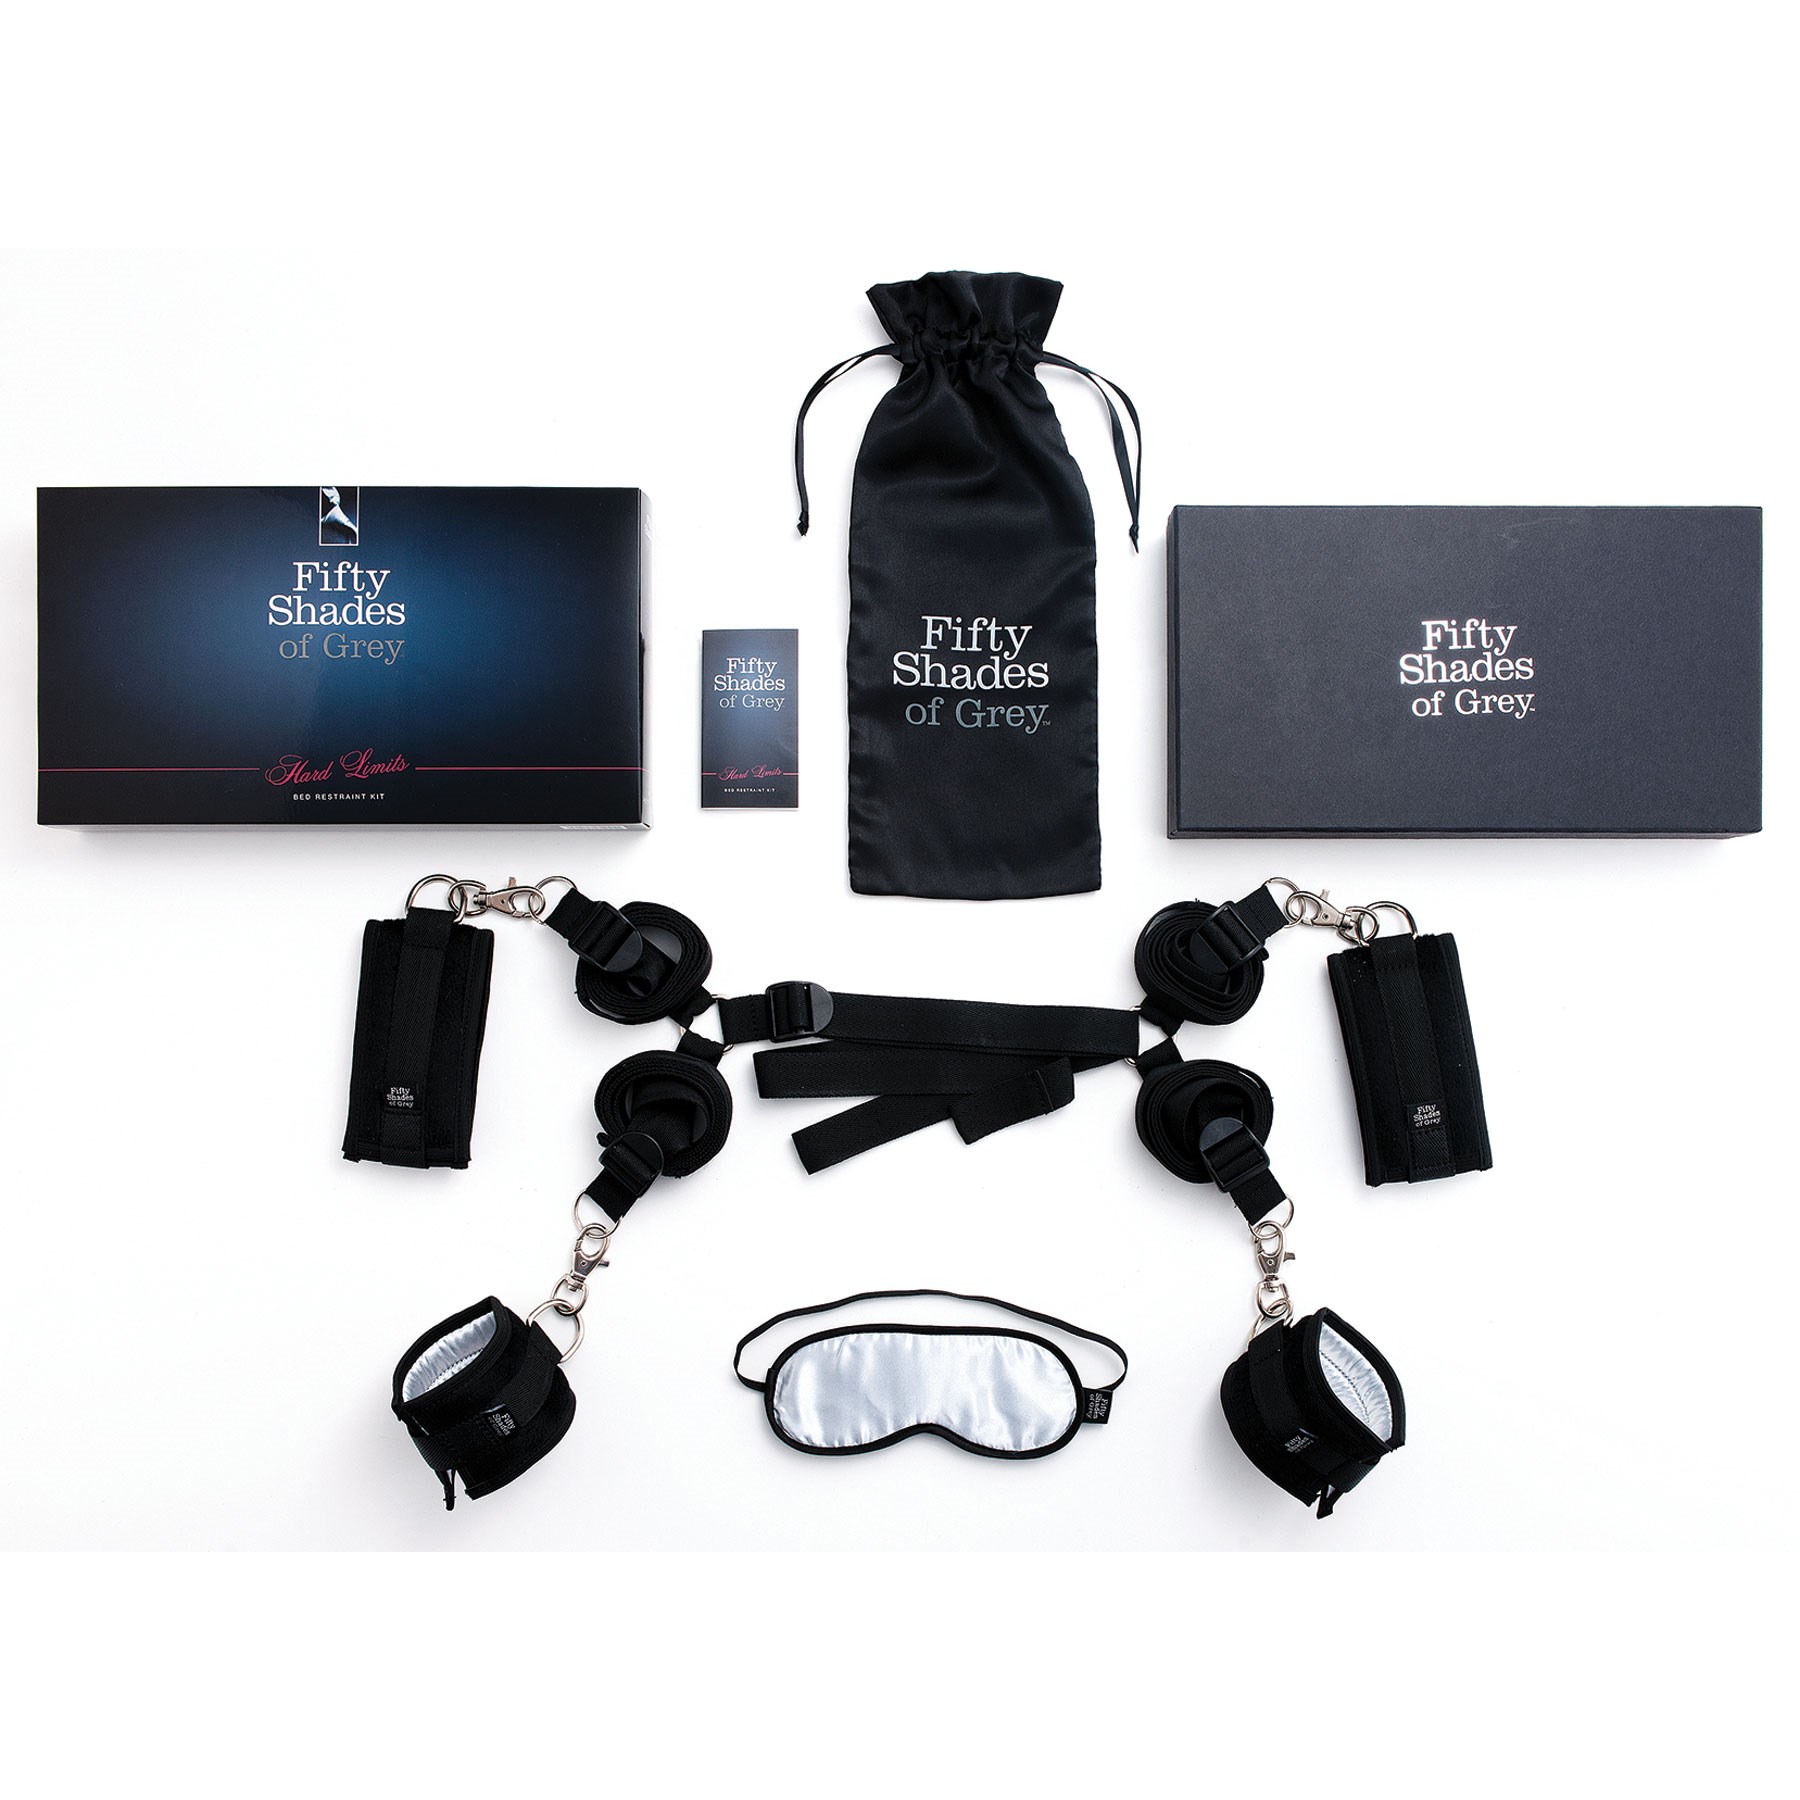 Fifty Shades of Grey Hard Limits Bed Restraint Kit with packaging